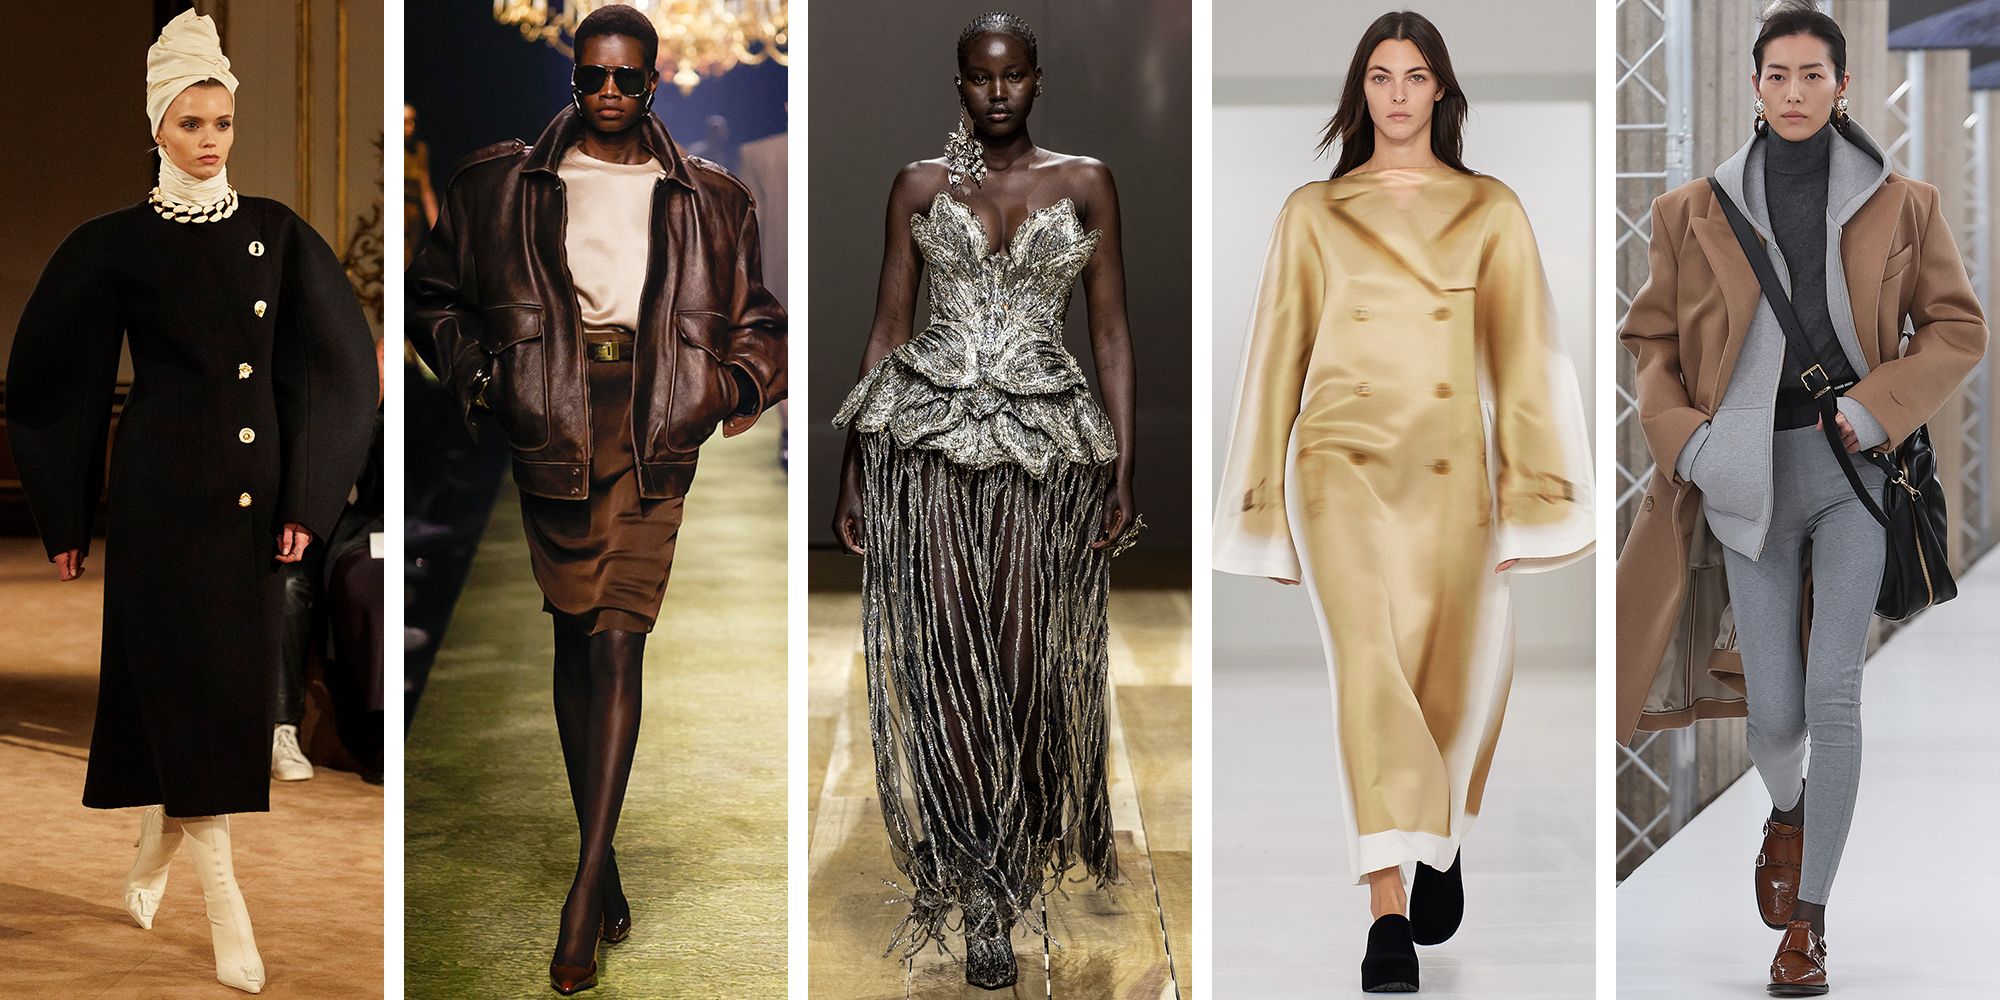 Women's High Fashion RTW Runway Looks, Outfits